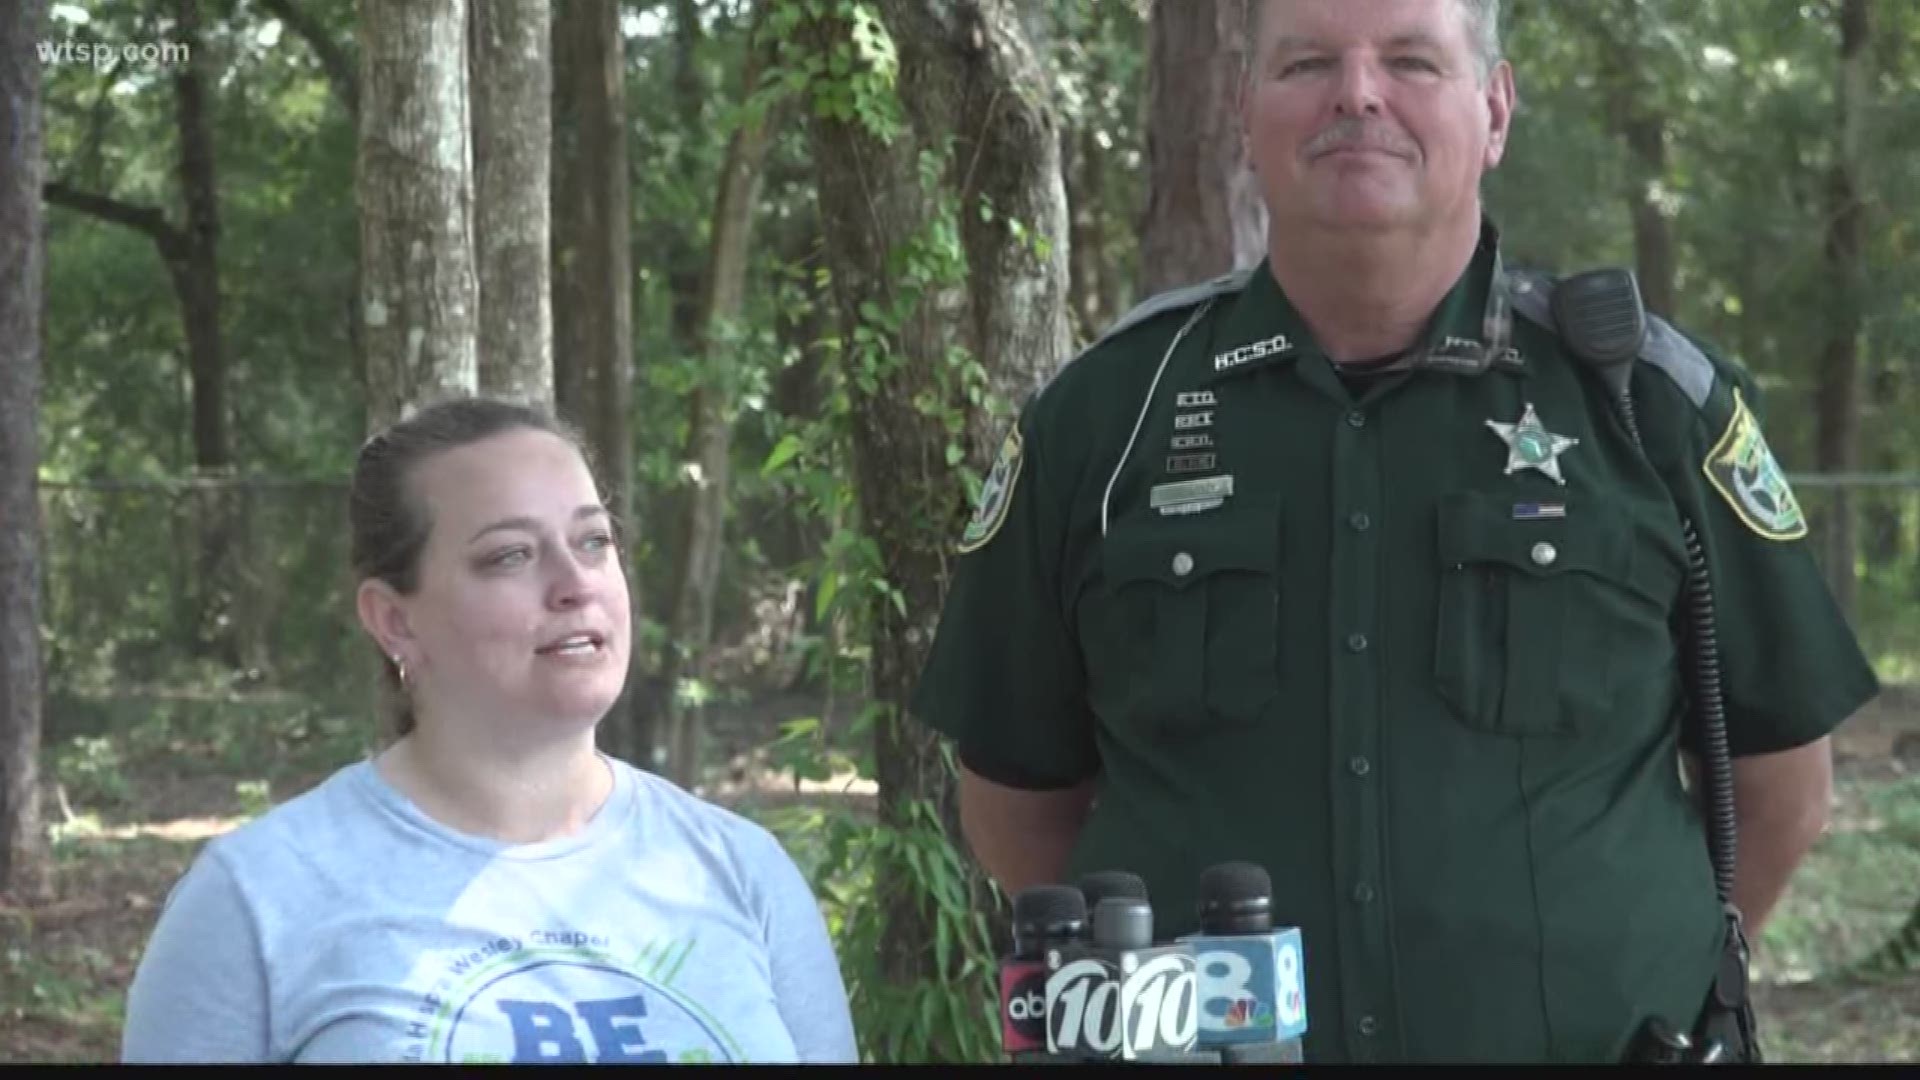 The mom called Deputy Christopher Downey a hero after he saved her 3-year-old son who had stopped breathing. https://on.wtsp.com/2lTGYjv